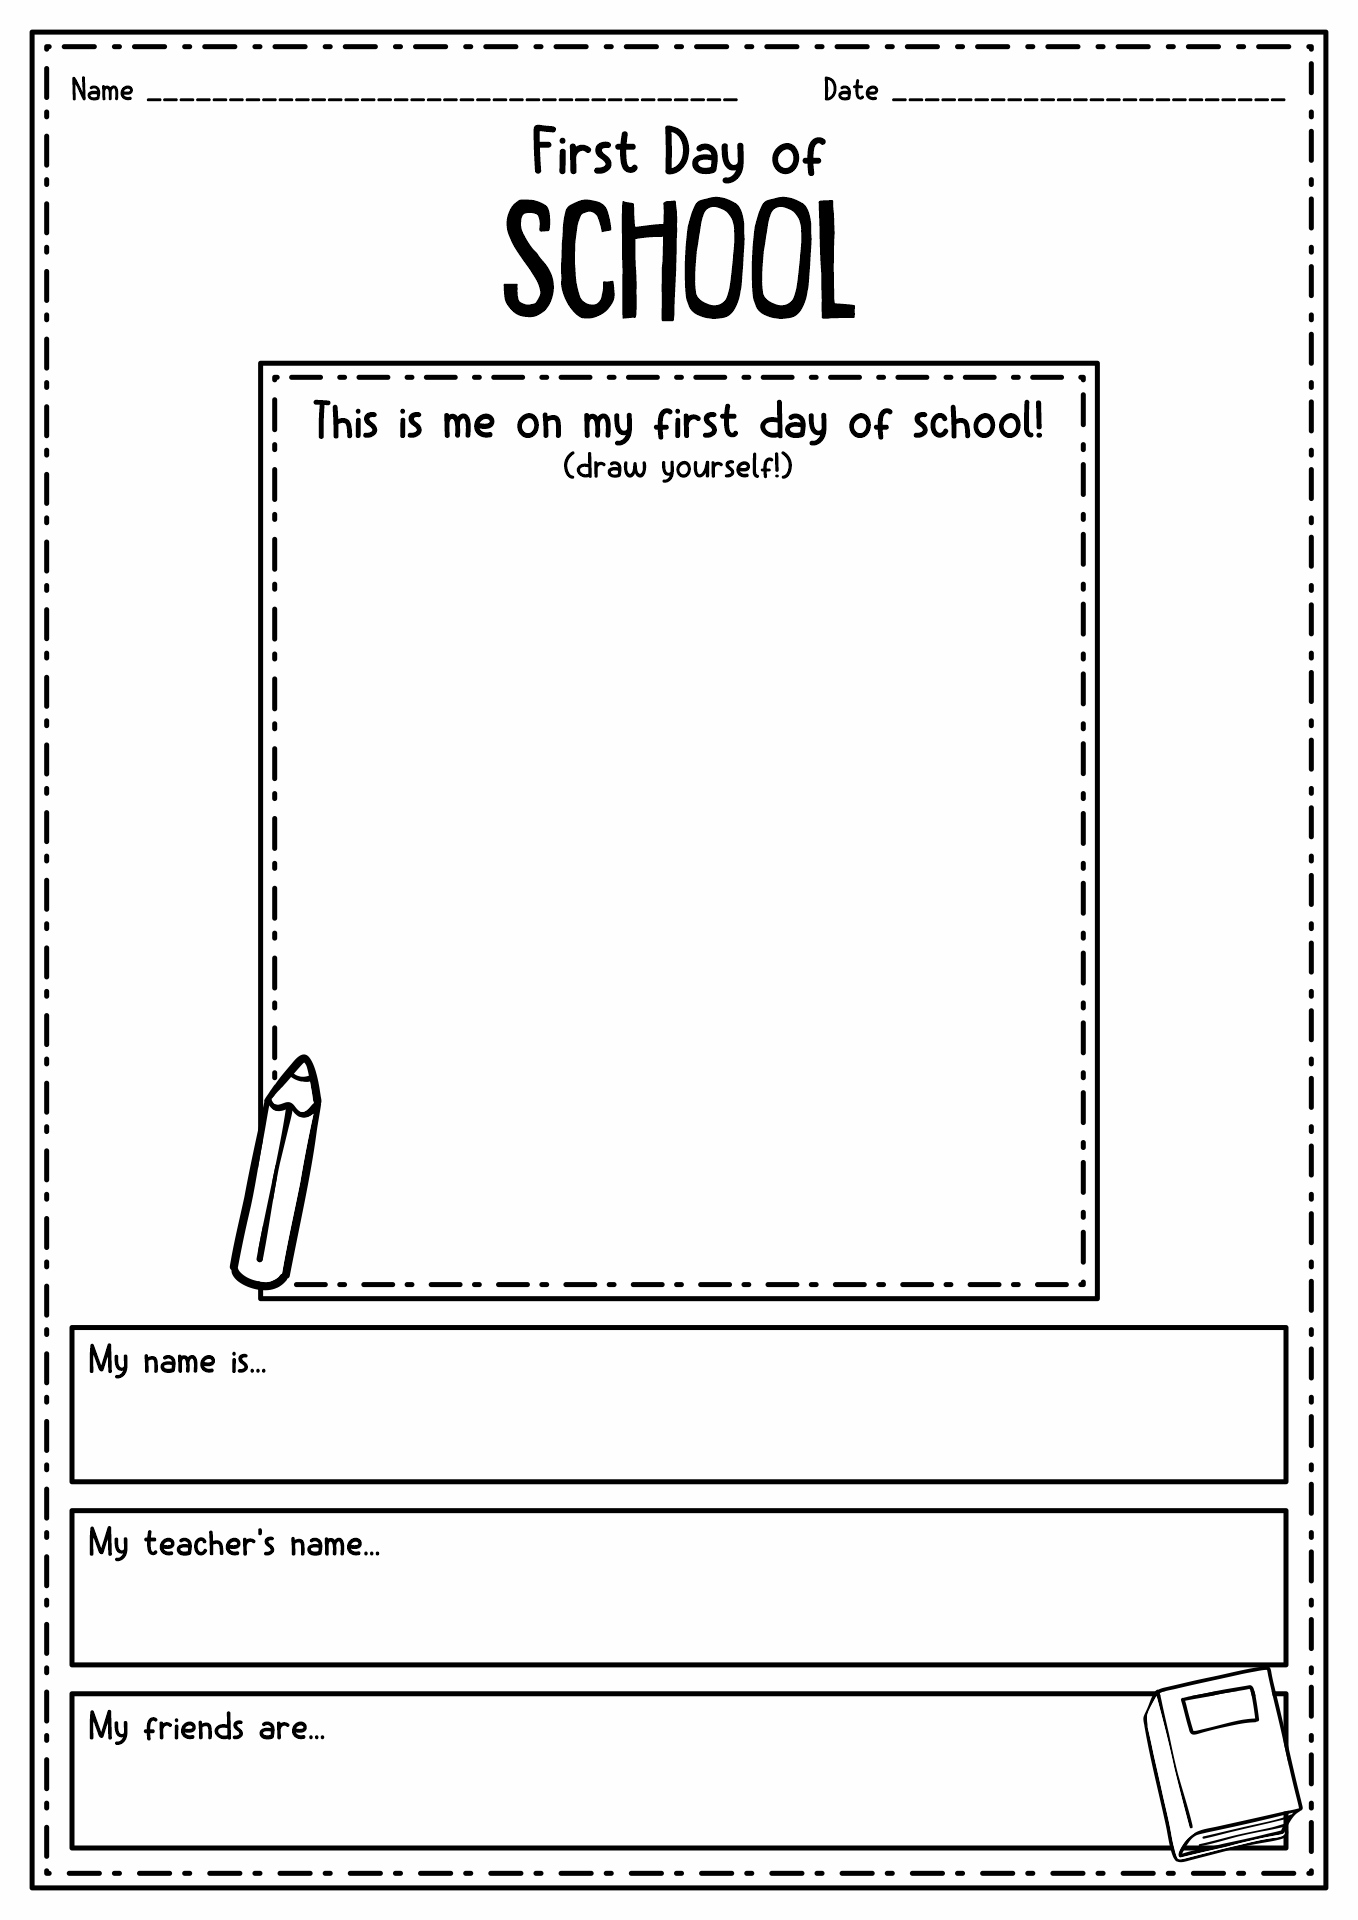 First Day of School Worksheets 1st Grade Image